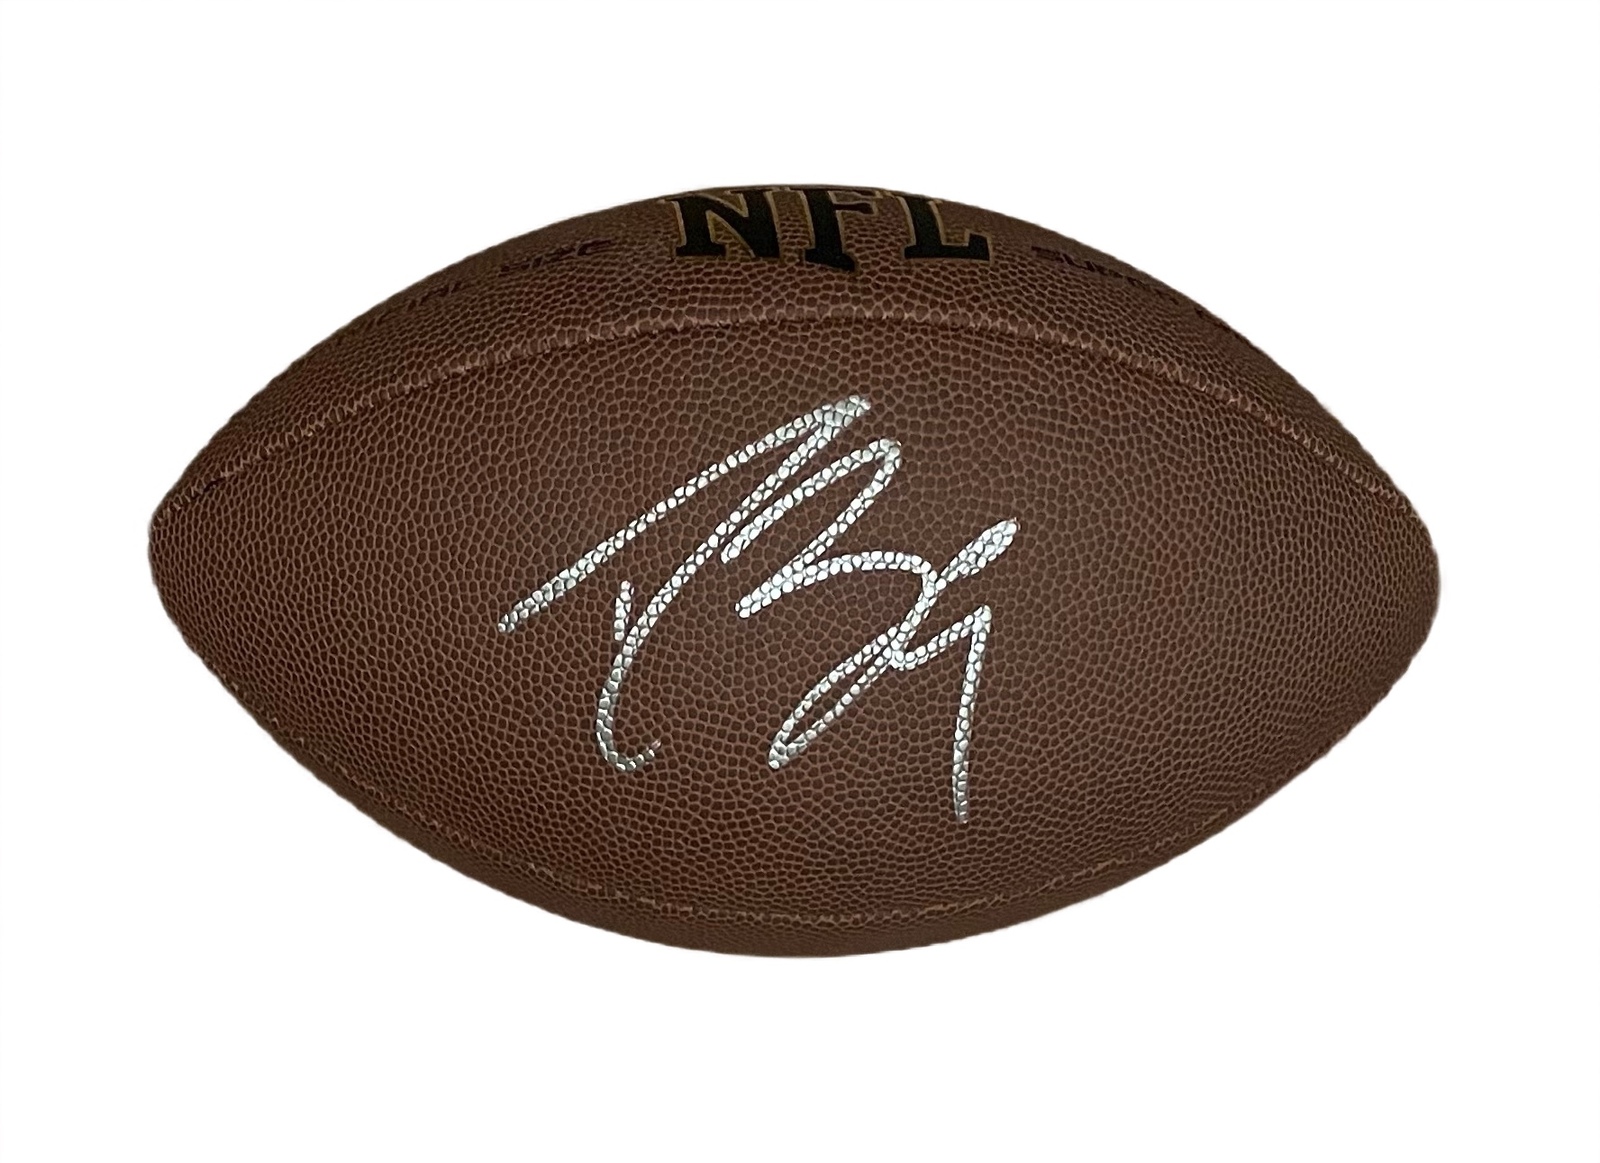 DREW BREES Autographed Hand SIGNED WILSON NFL FOOTBALL New Orleans SAINTS w/COA - $199.99